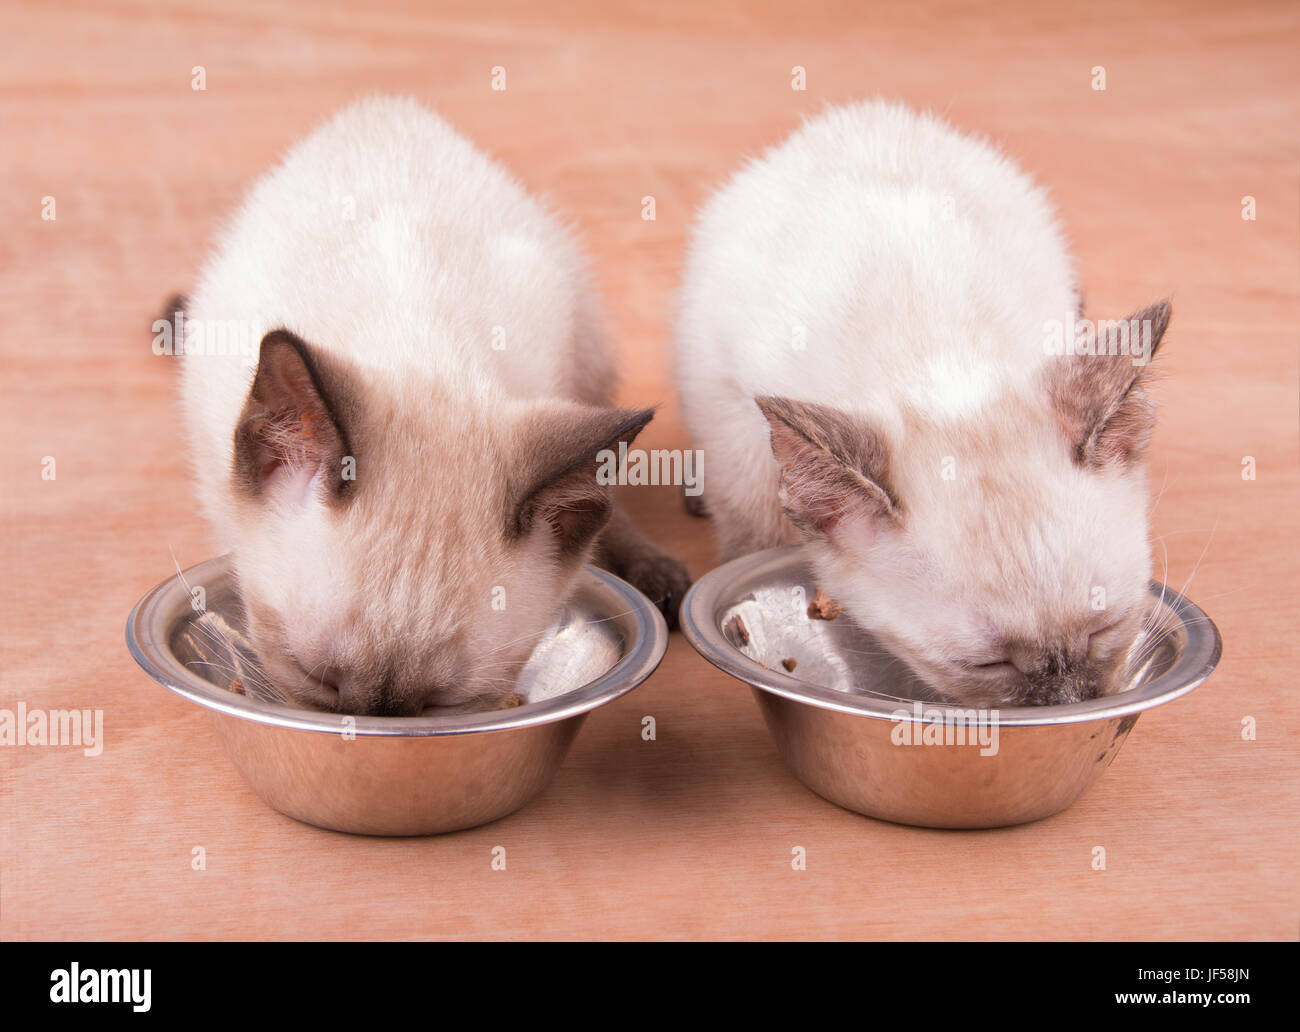 Two adorable Simaese kittens eating from silver bowls Stock Photo